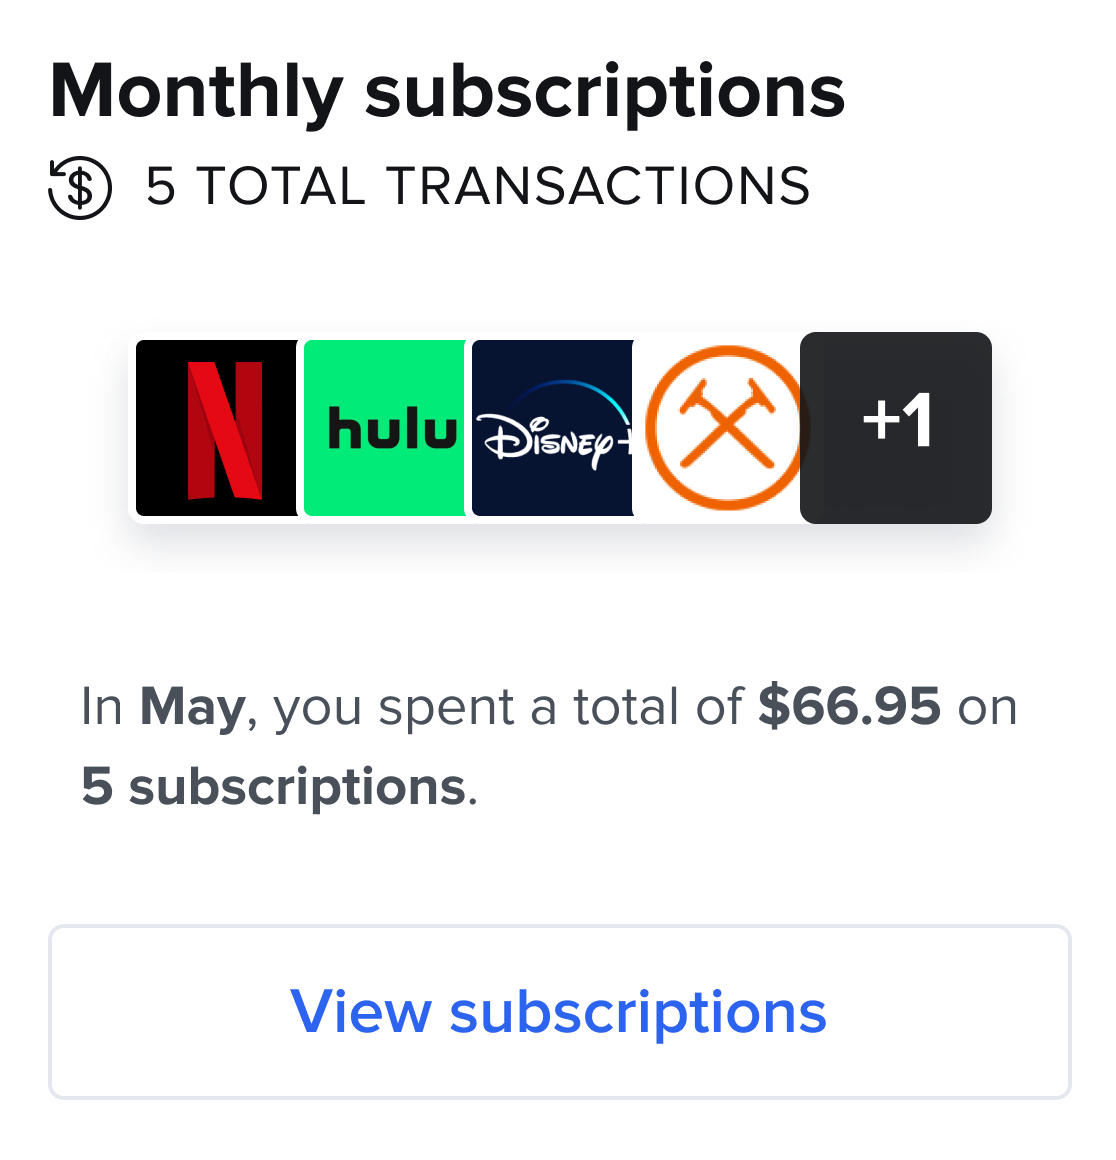 Monthly subscriptions